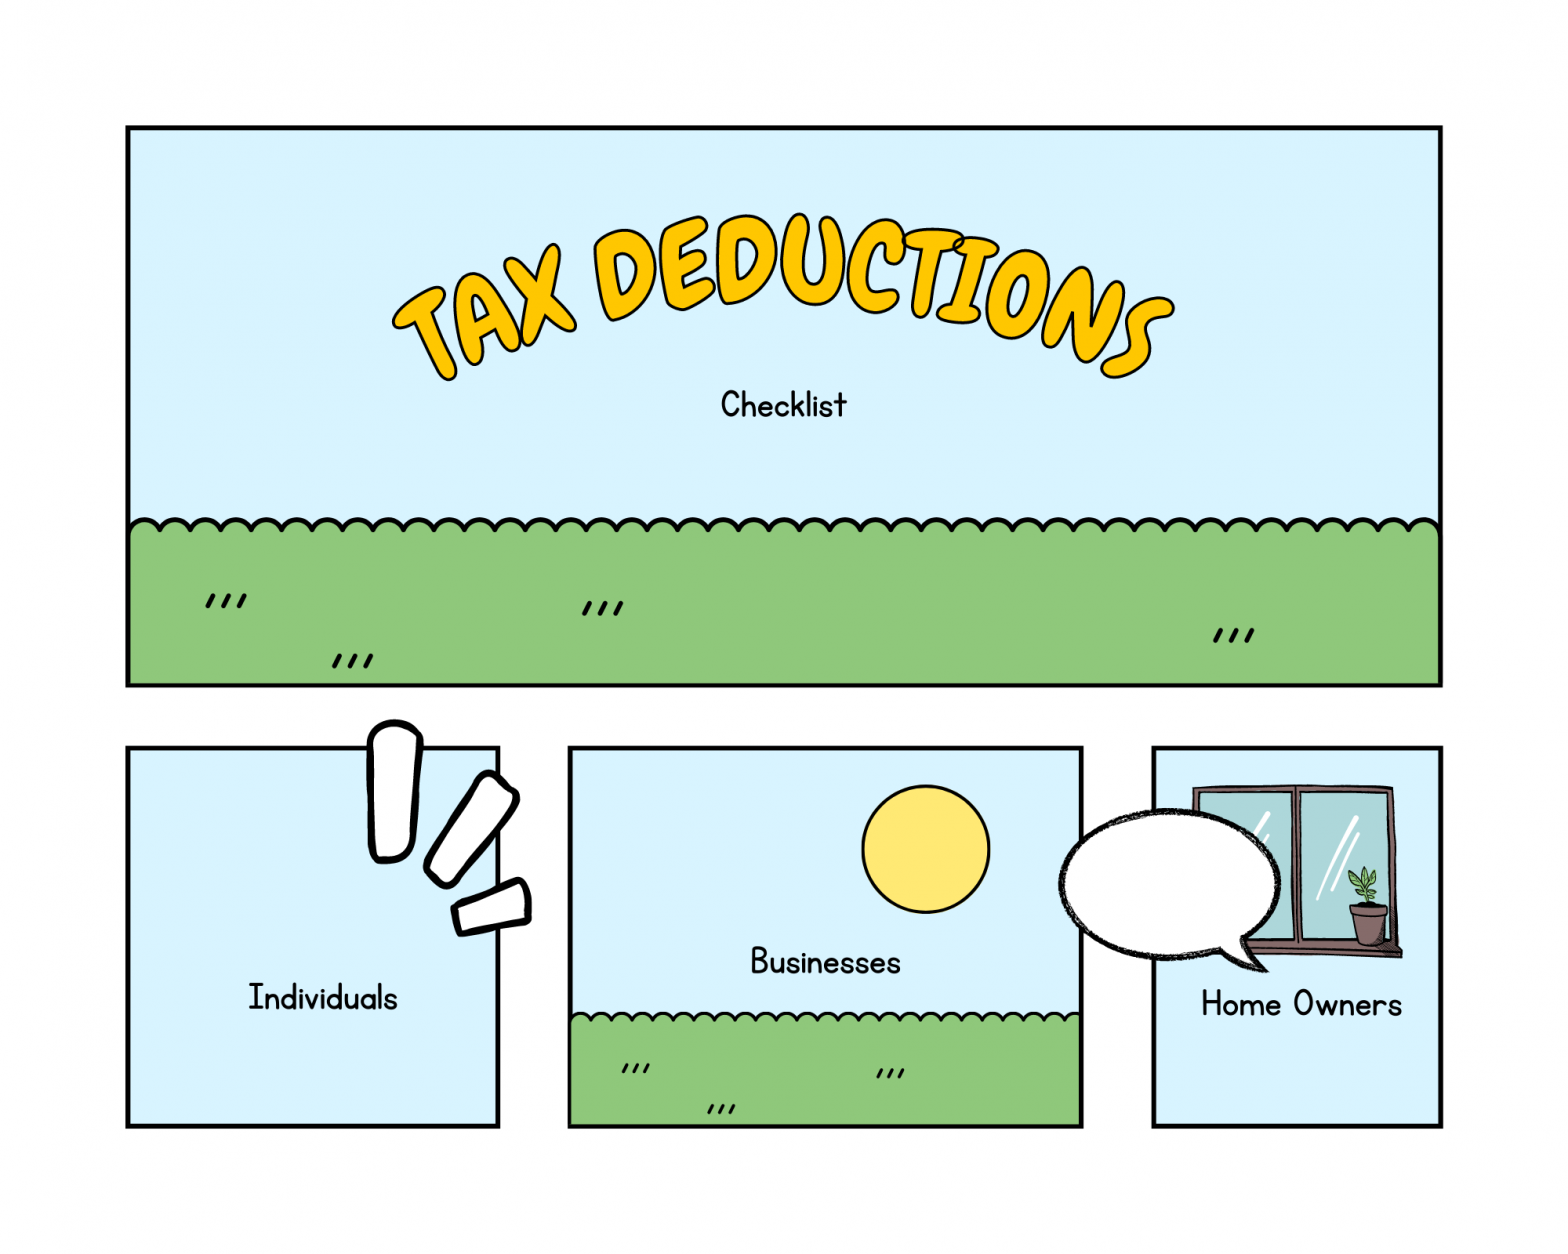 The Ultimate Tax Deductions Checklist: How to Save Money on Your Taxes